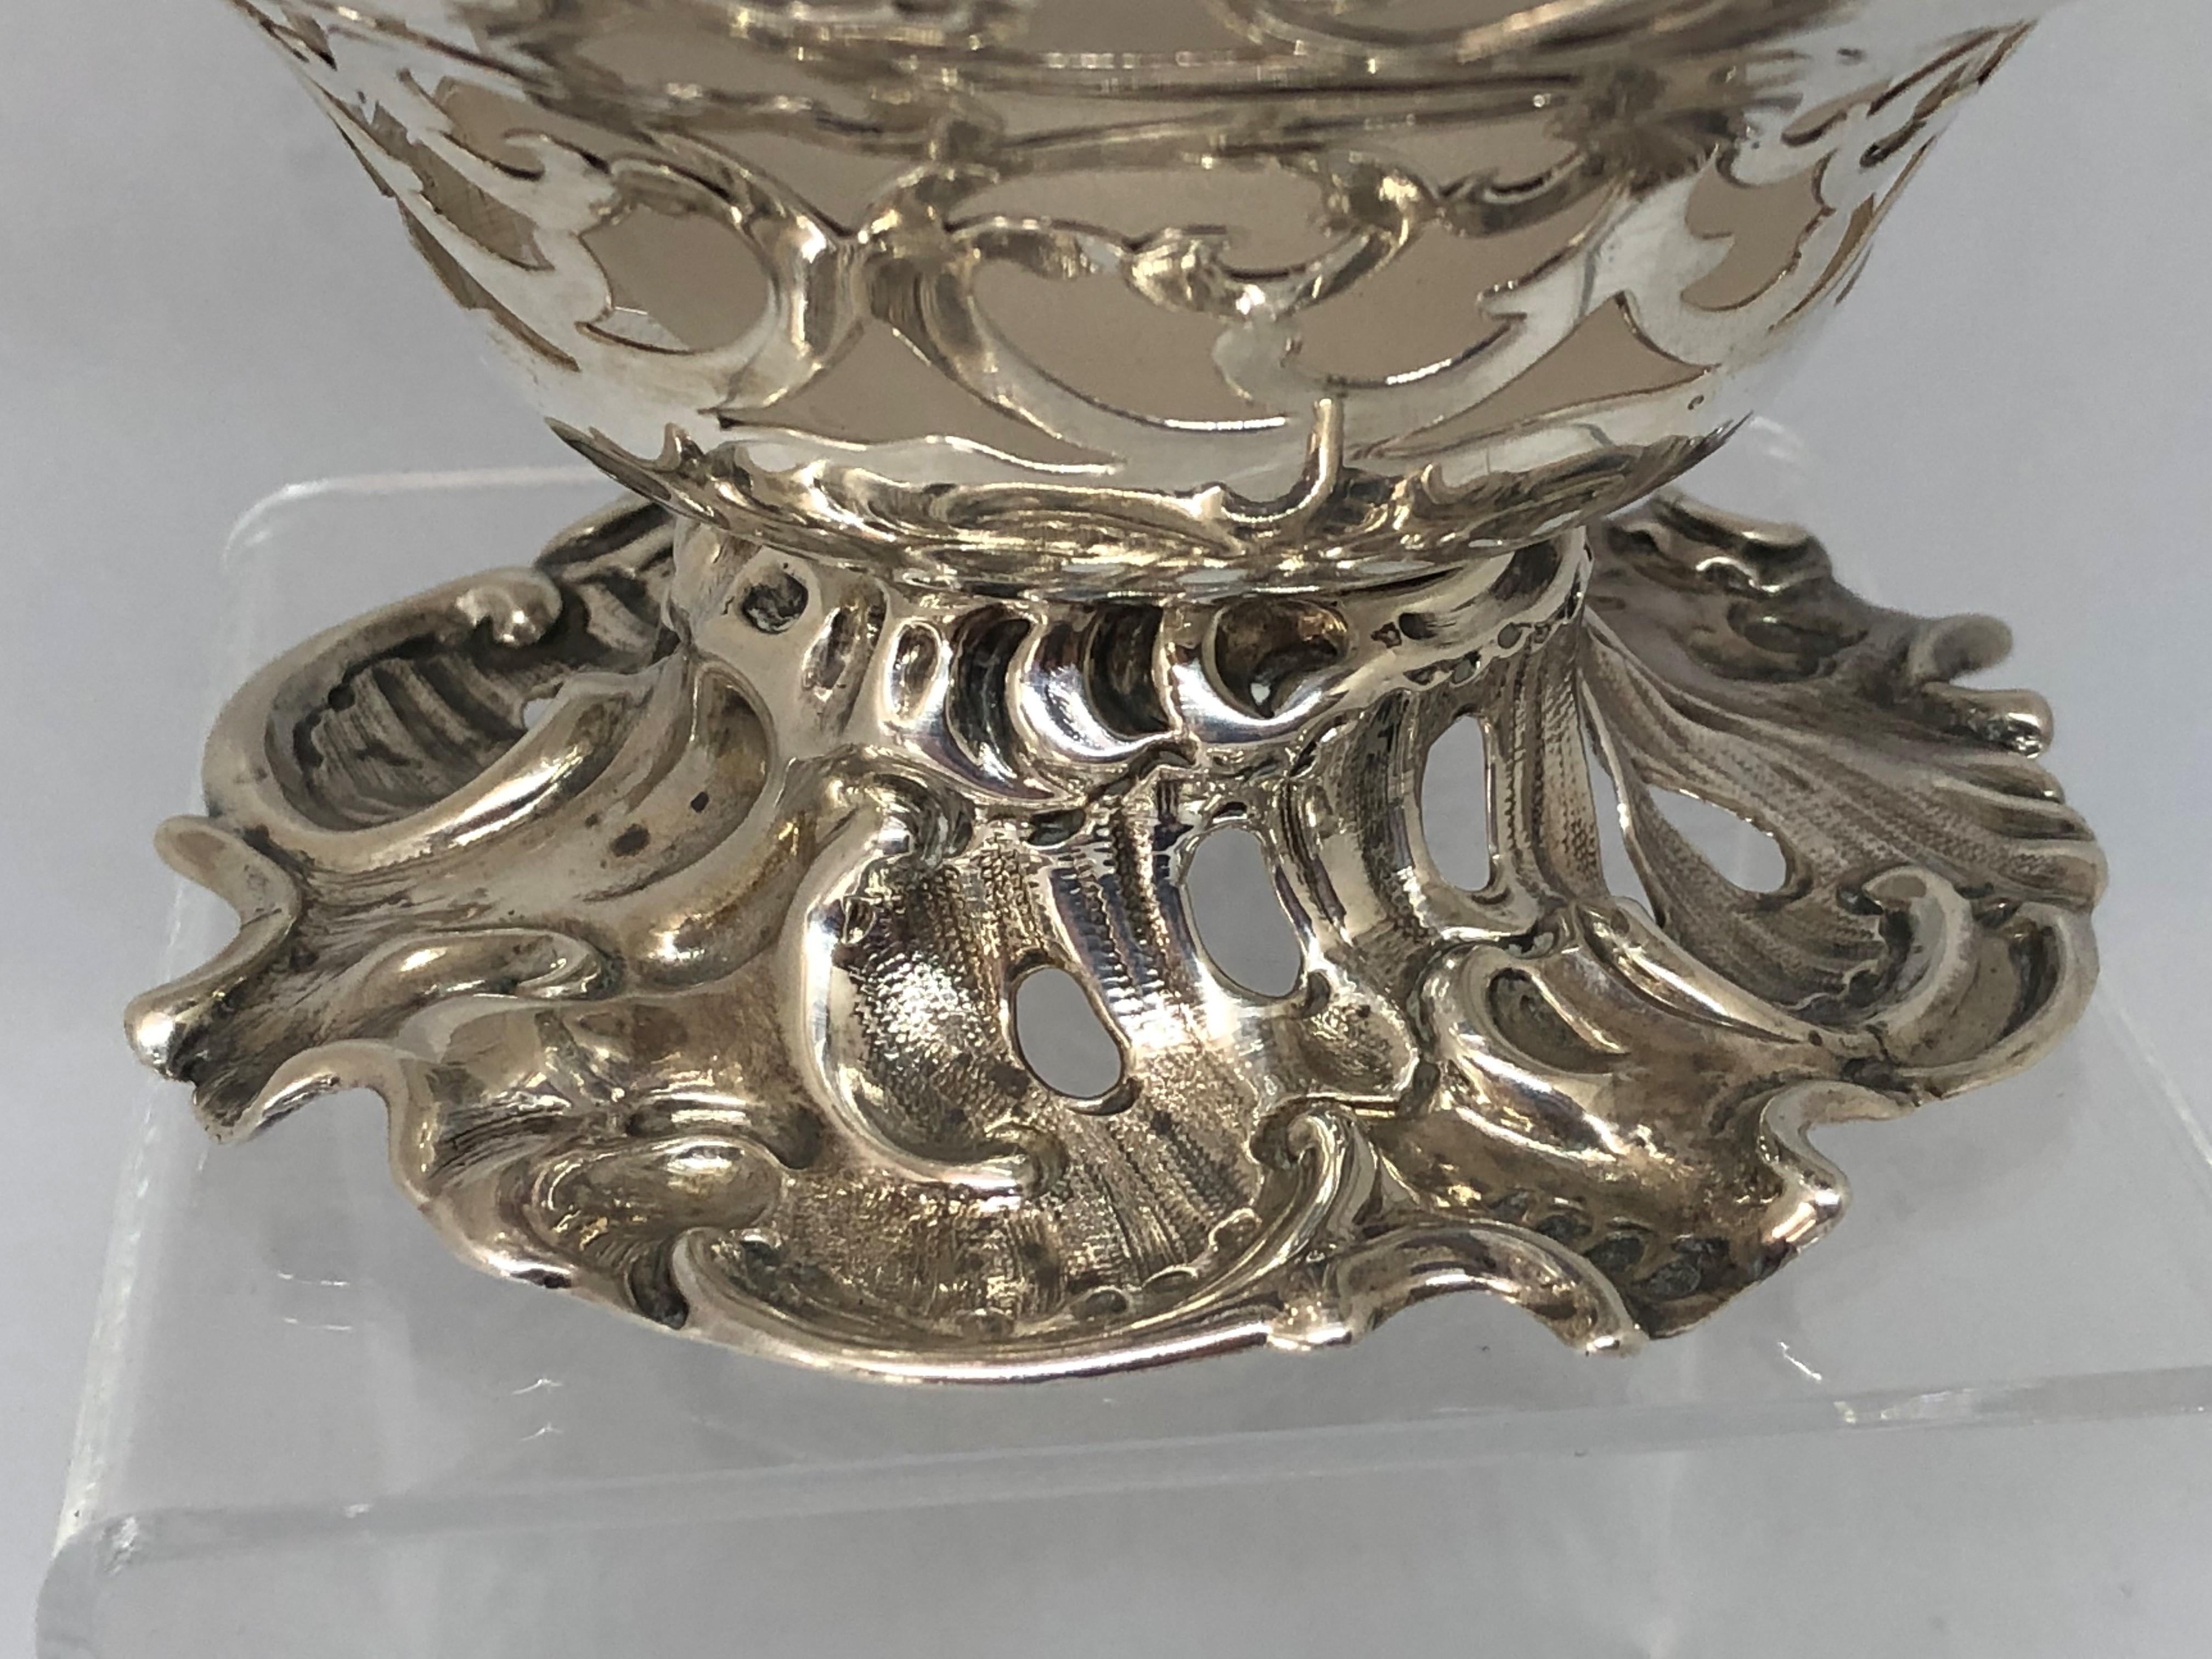 A fine quality early Victorian silver comport or pedestal standing dish, the body with pierced scroll detail, atop a cast rococo shell and scroll spreading foot.

Complete with contemporary opaque glass liner with star-cut base.

Charles and George